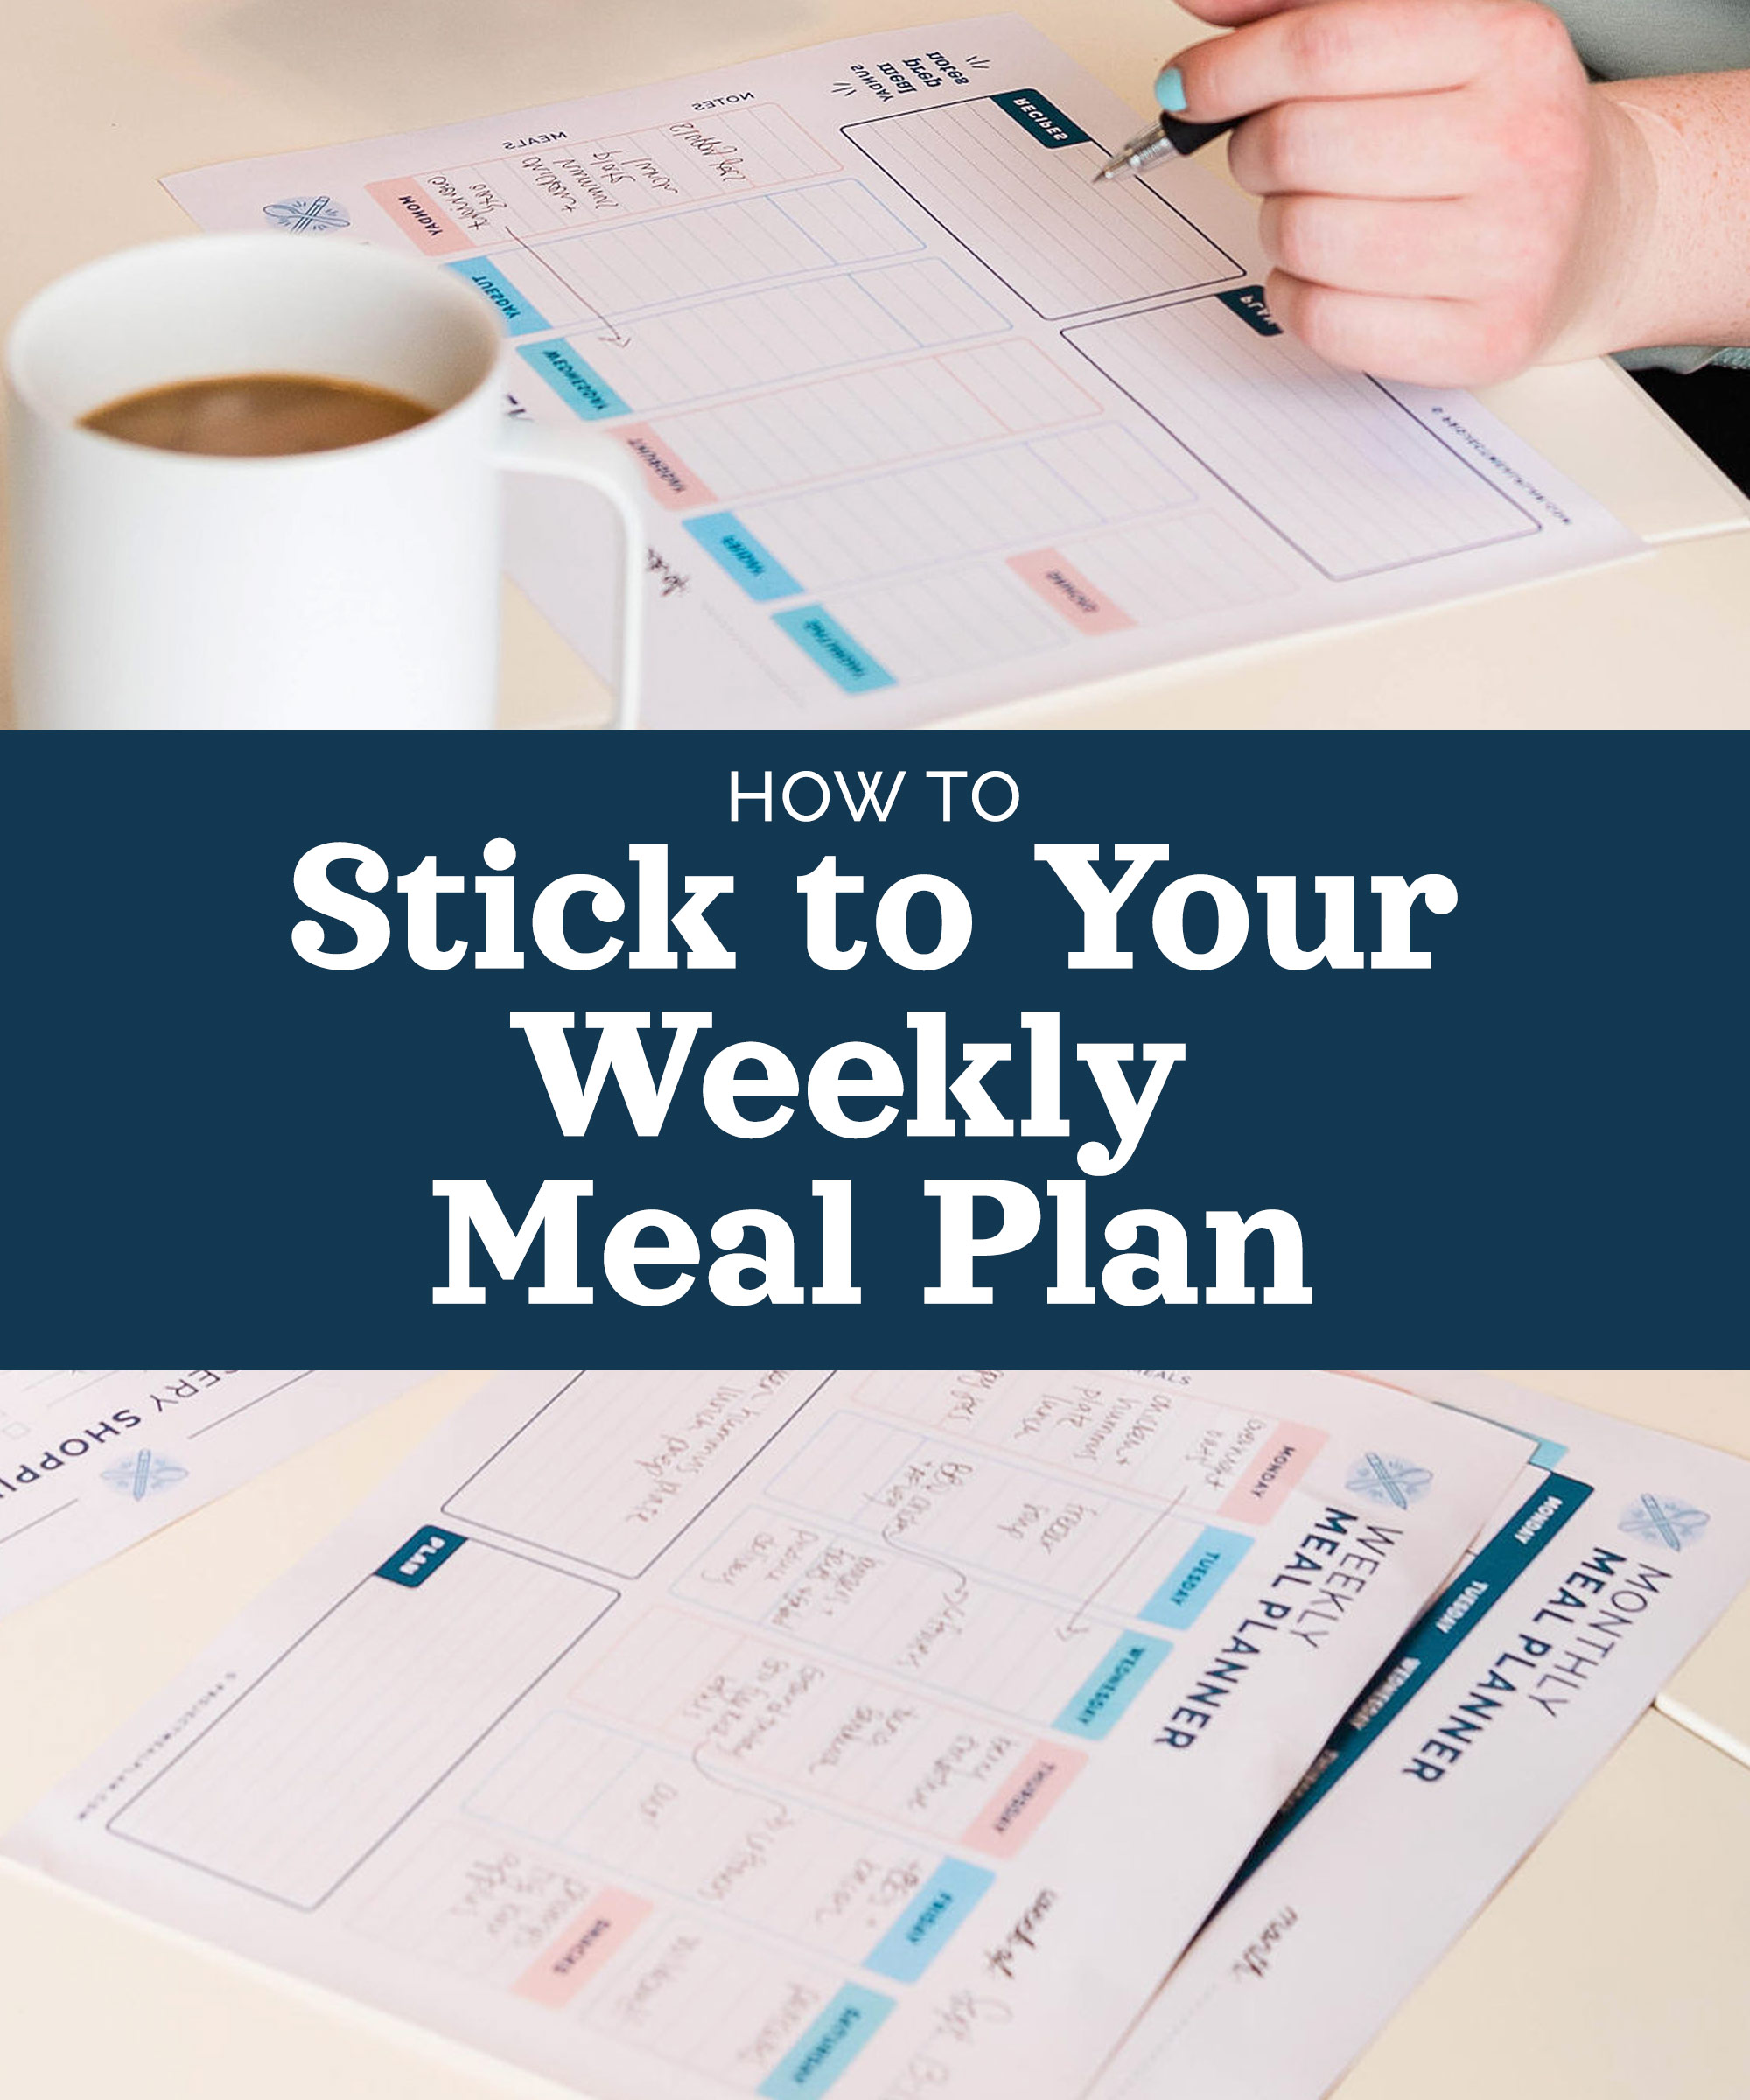 https://cdn4.projectmealplan.com/wp-content/uploads/2023/01/2023-how-to-stick-to-your-weekly-meal-plan-cover.jpg